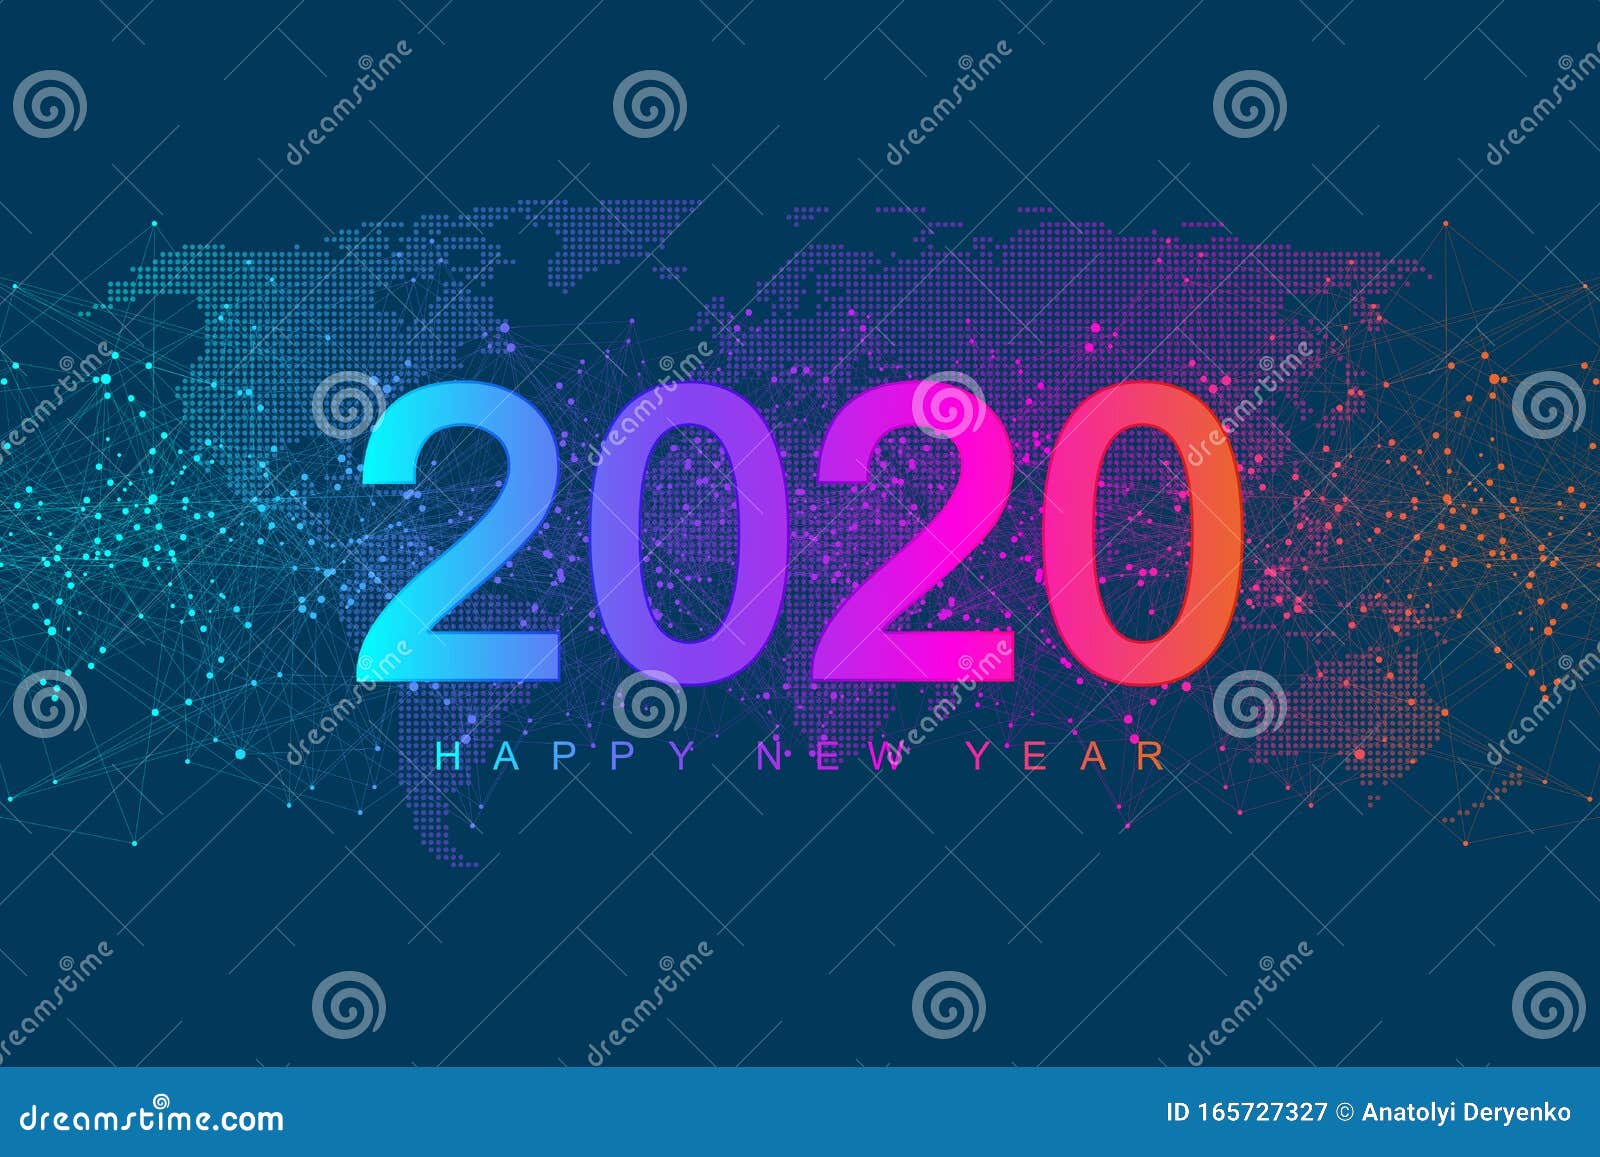 Merry Christmas and Happy New Year 2020 Greeting Card. Modern ...